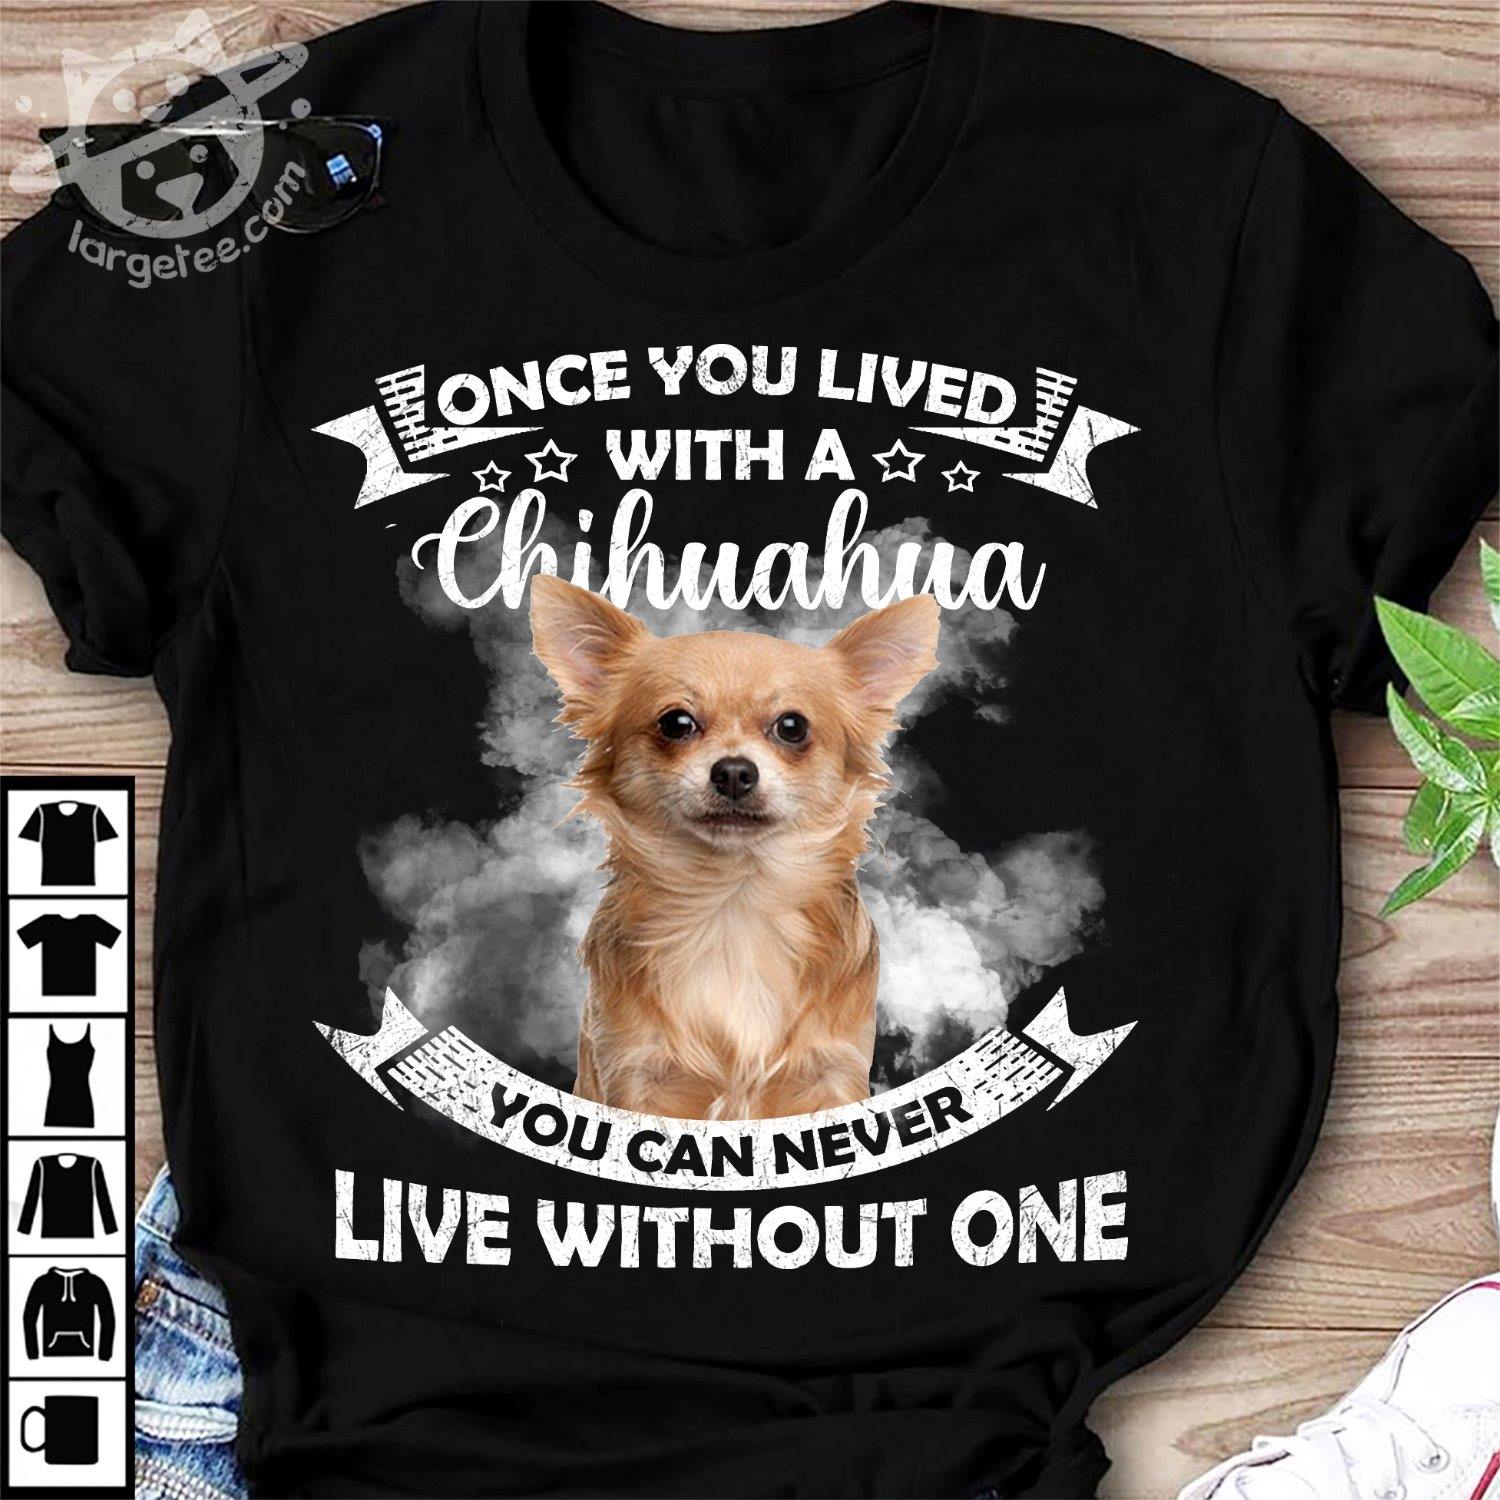 Once you lived with a Chihuahua you can never live without one - Dog lover